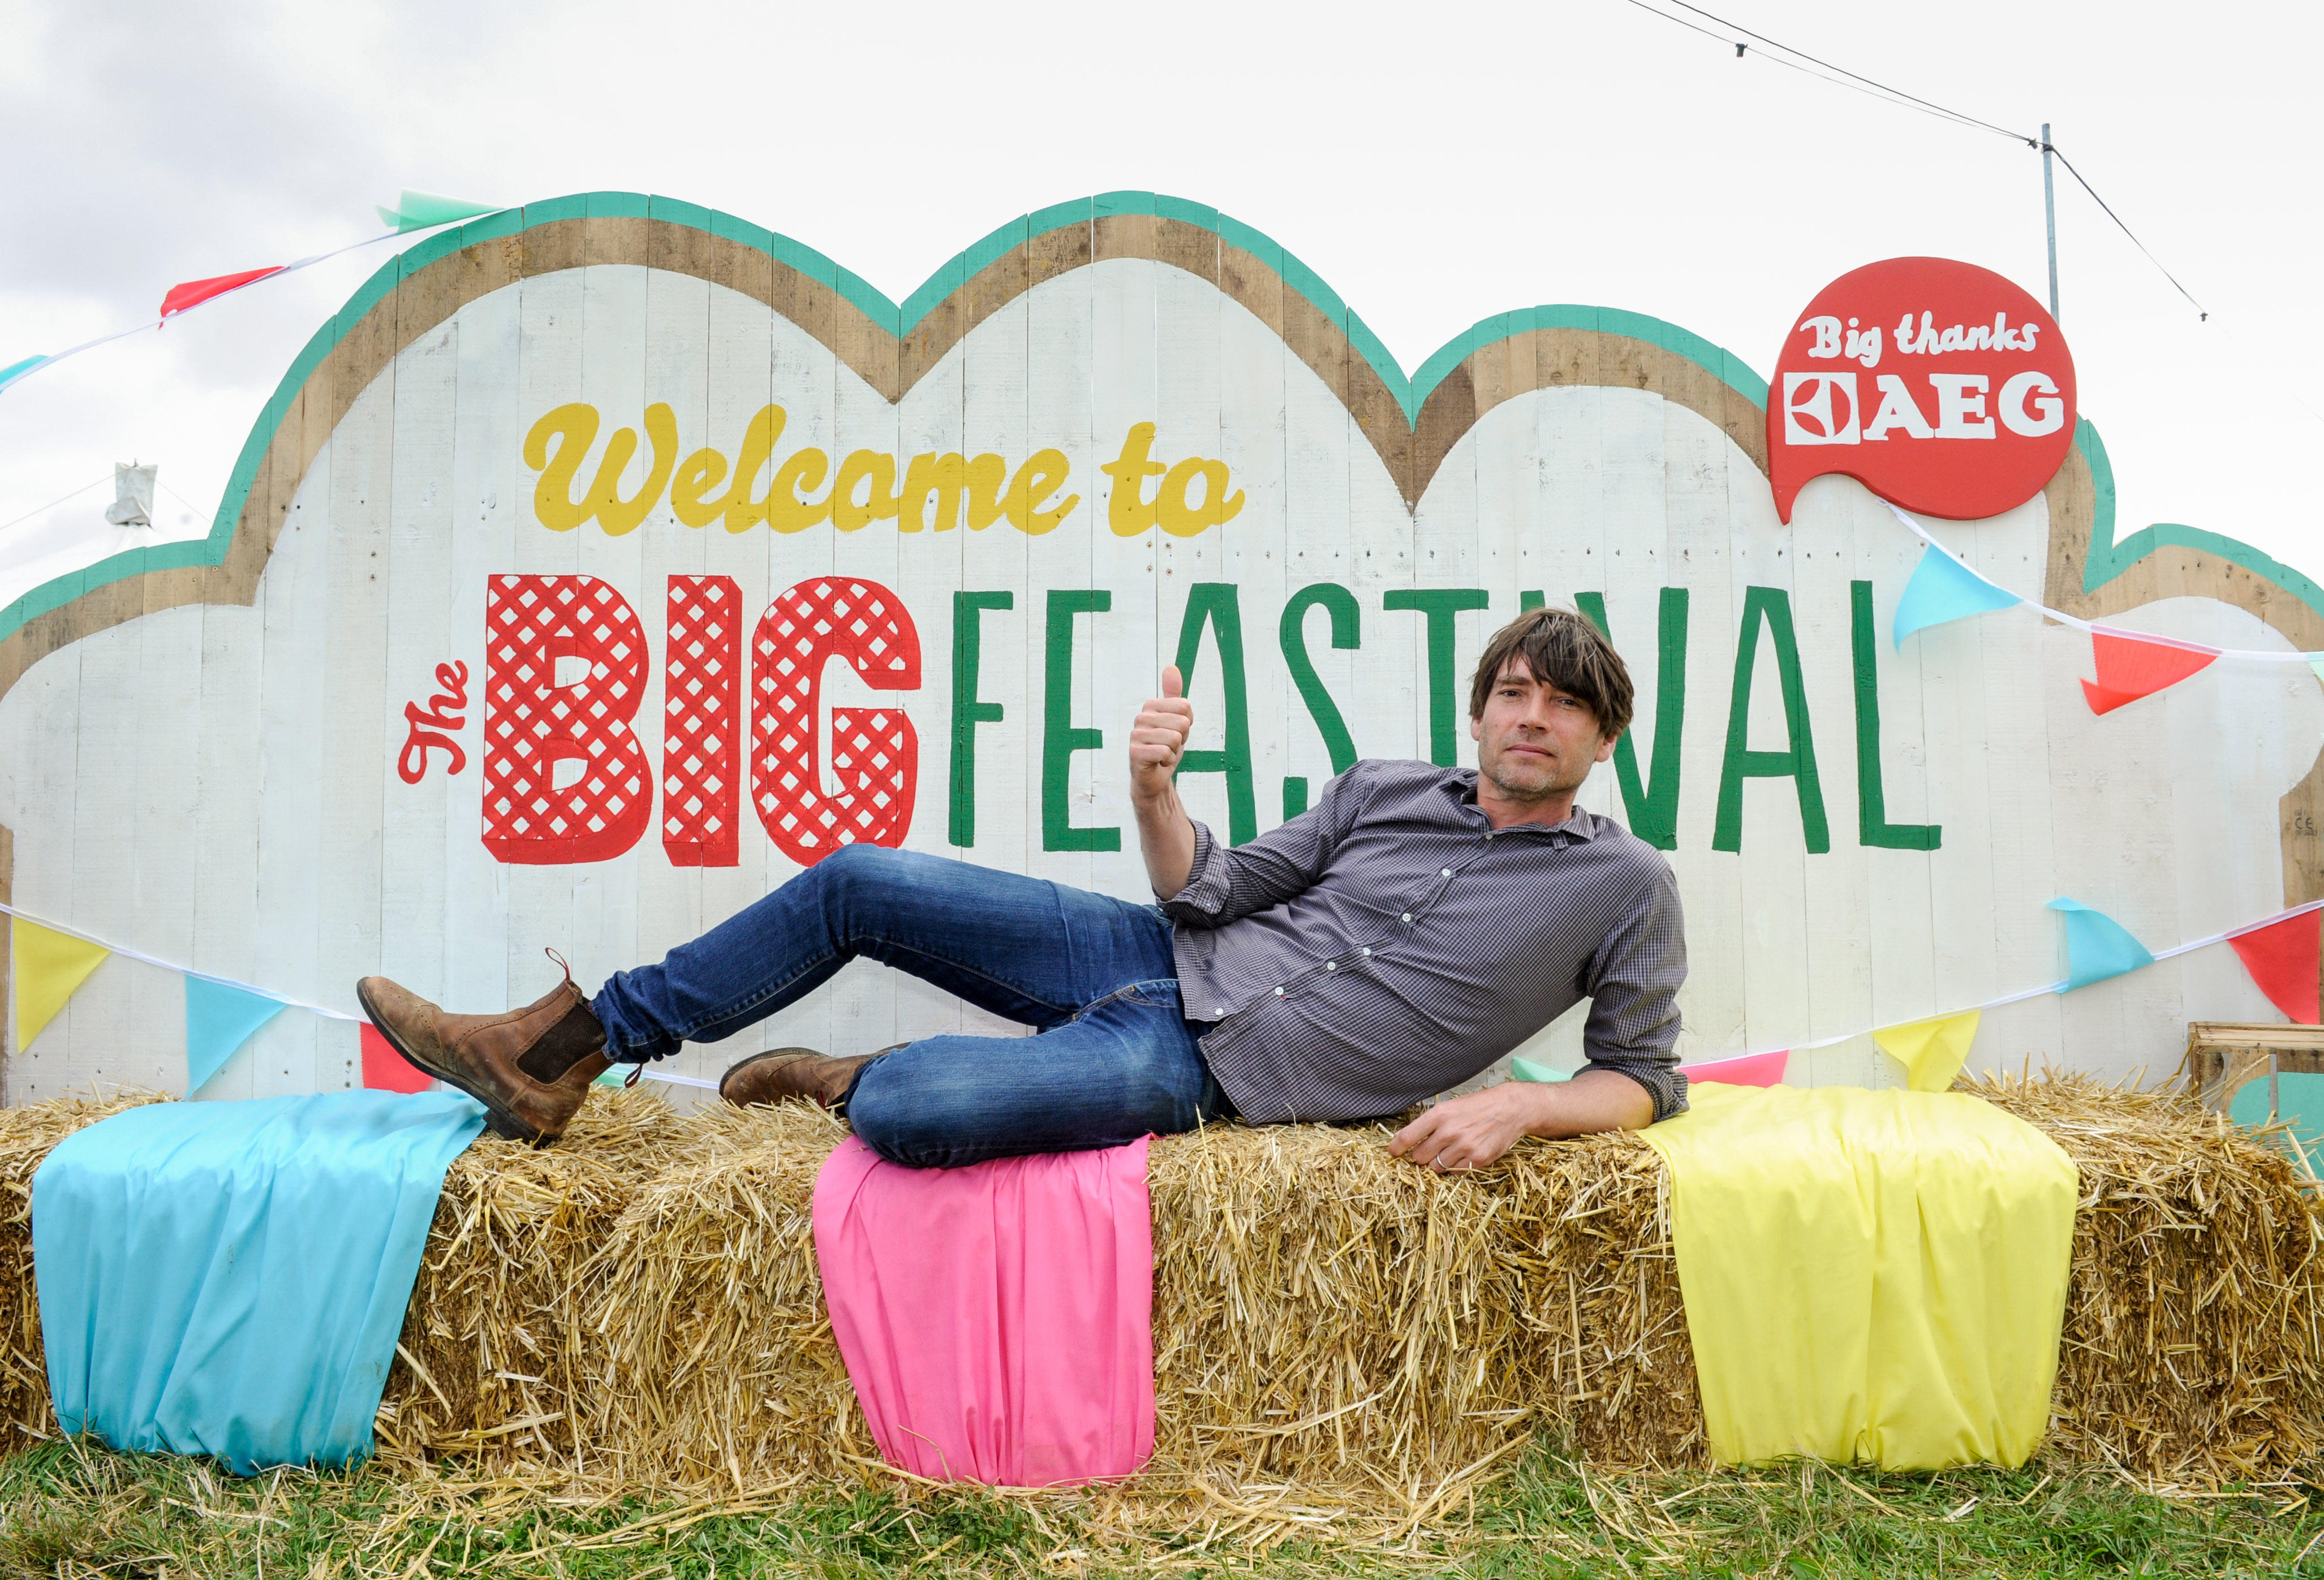 The Big Feastival is held annually at a Cotswold Farm owned by Blur bassist Alex James